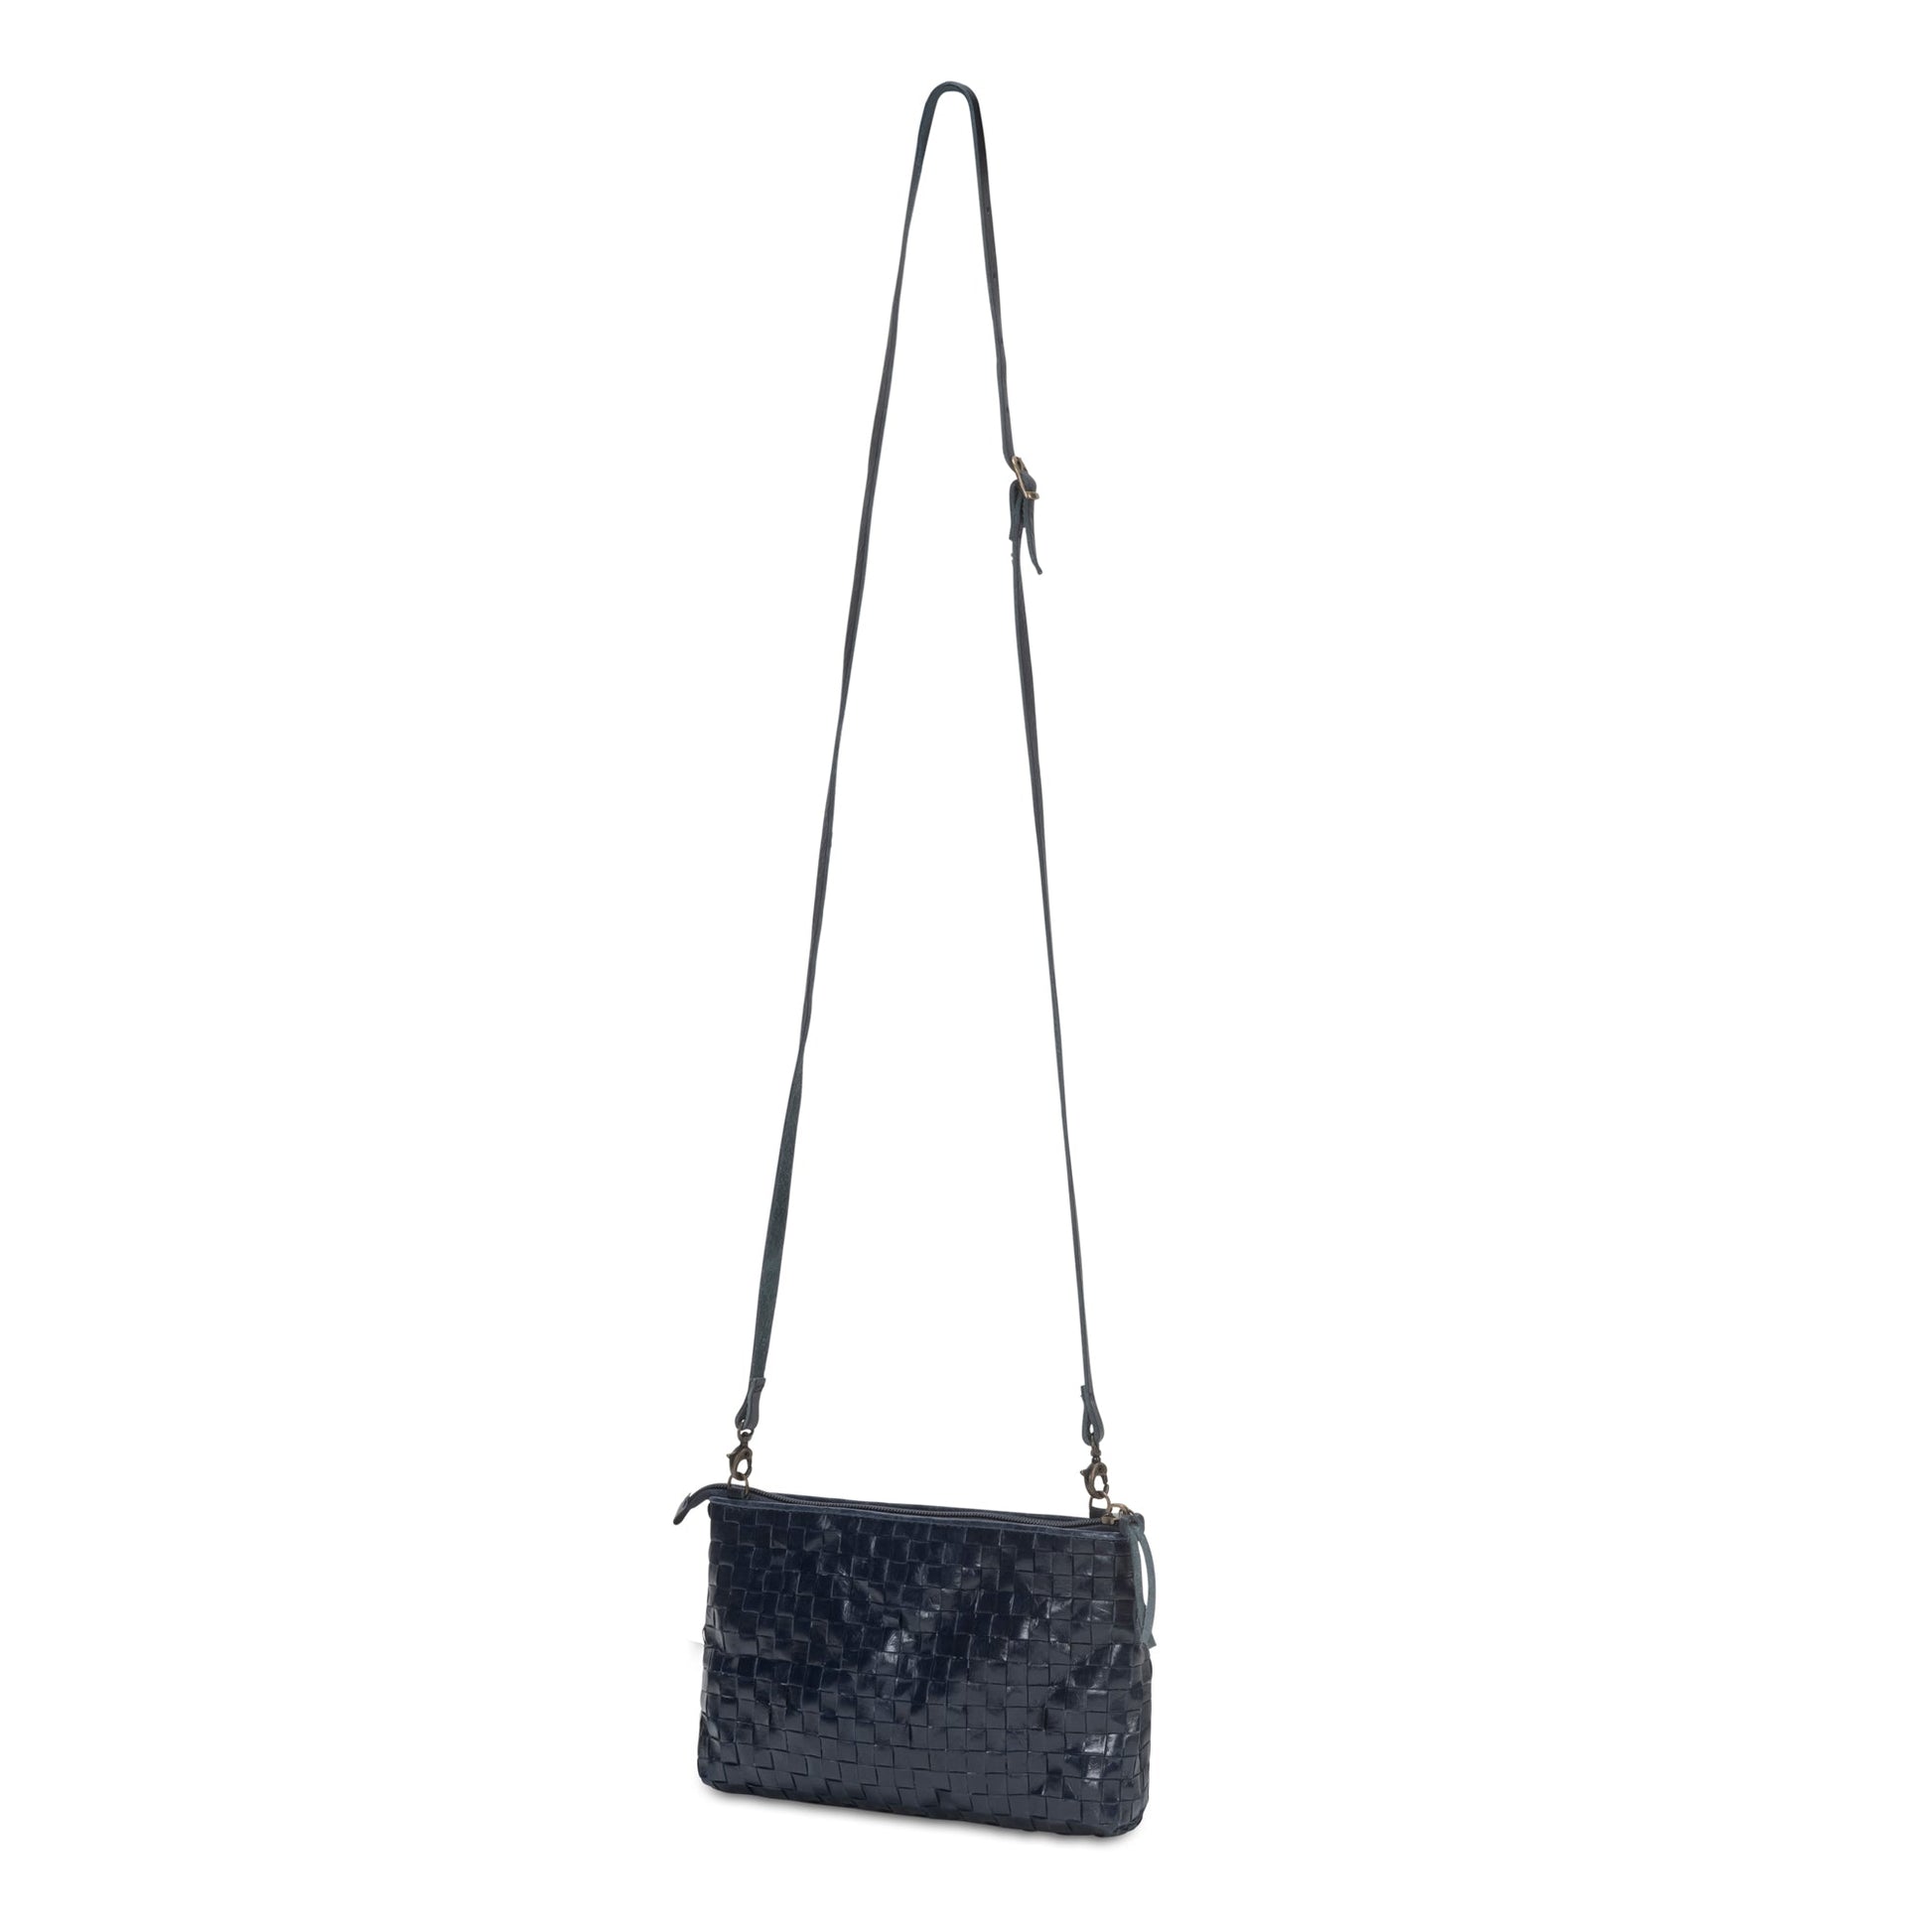 A black shiny woven washable paper small zip top handbag is shown with a long washable paper strap.